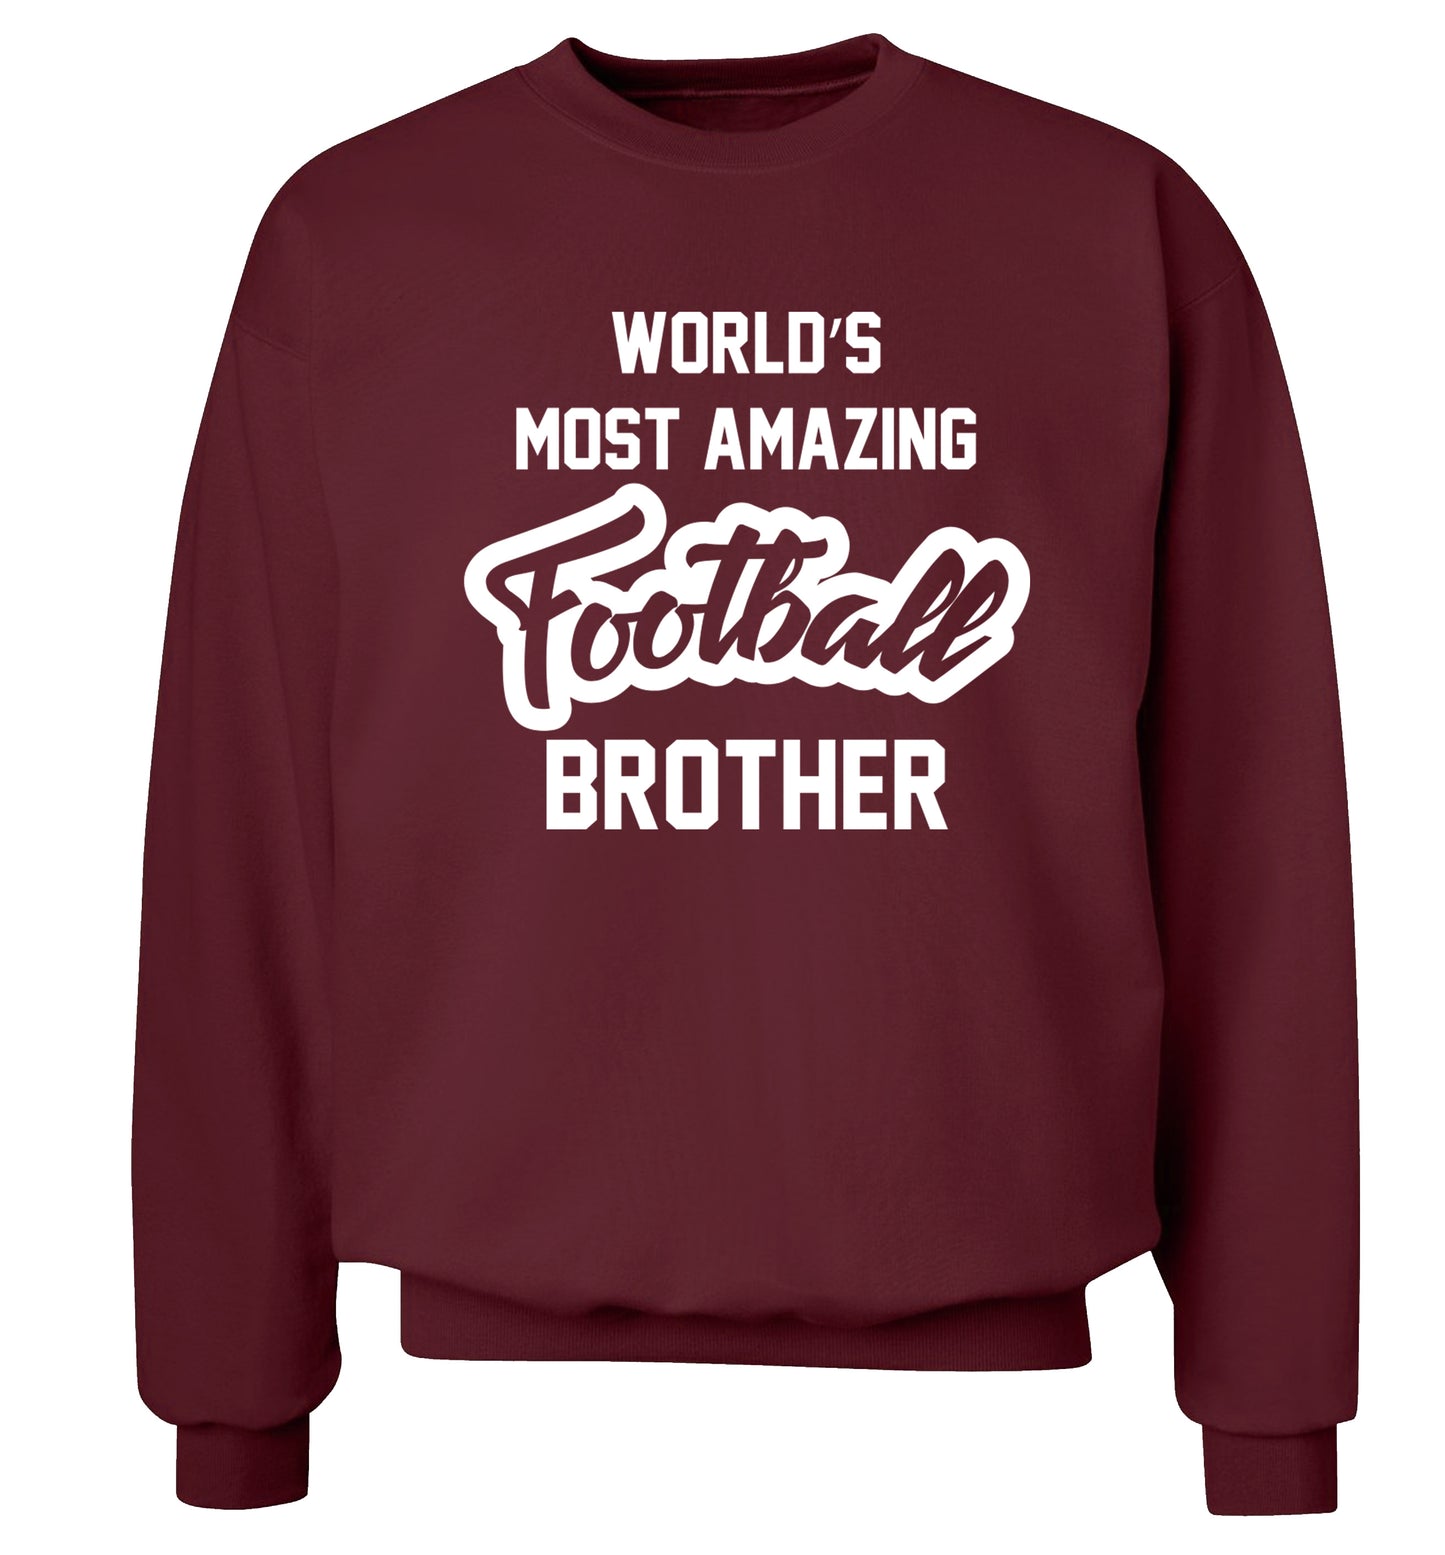 Worlds most amazing football brother Adult's unisexmaroon Sweater 2XL